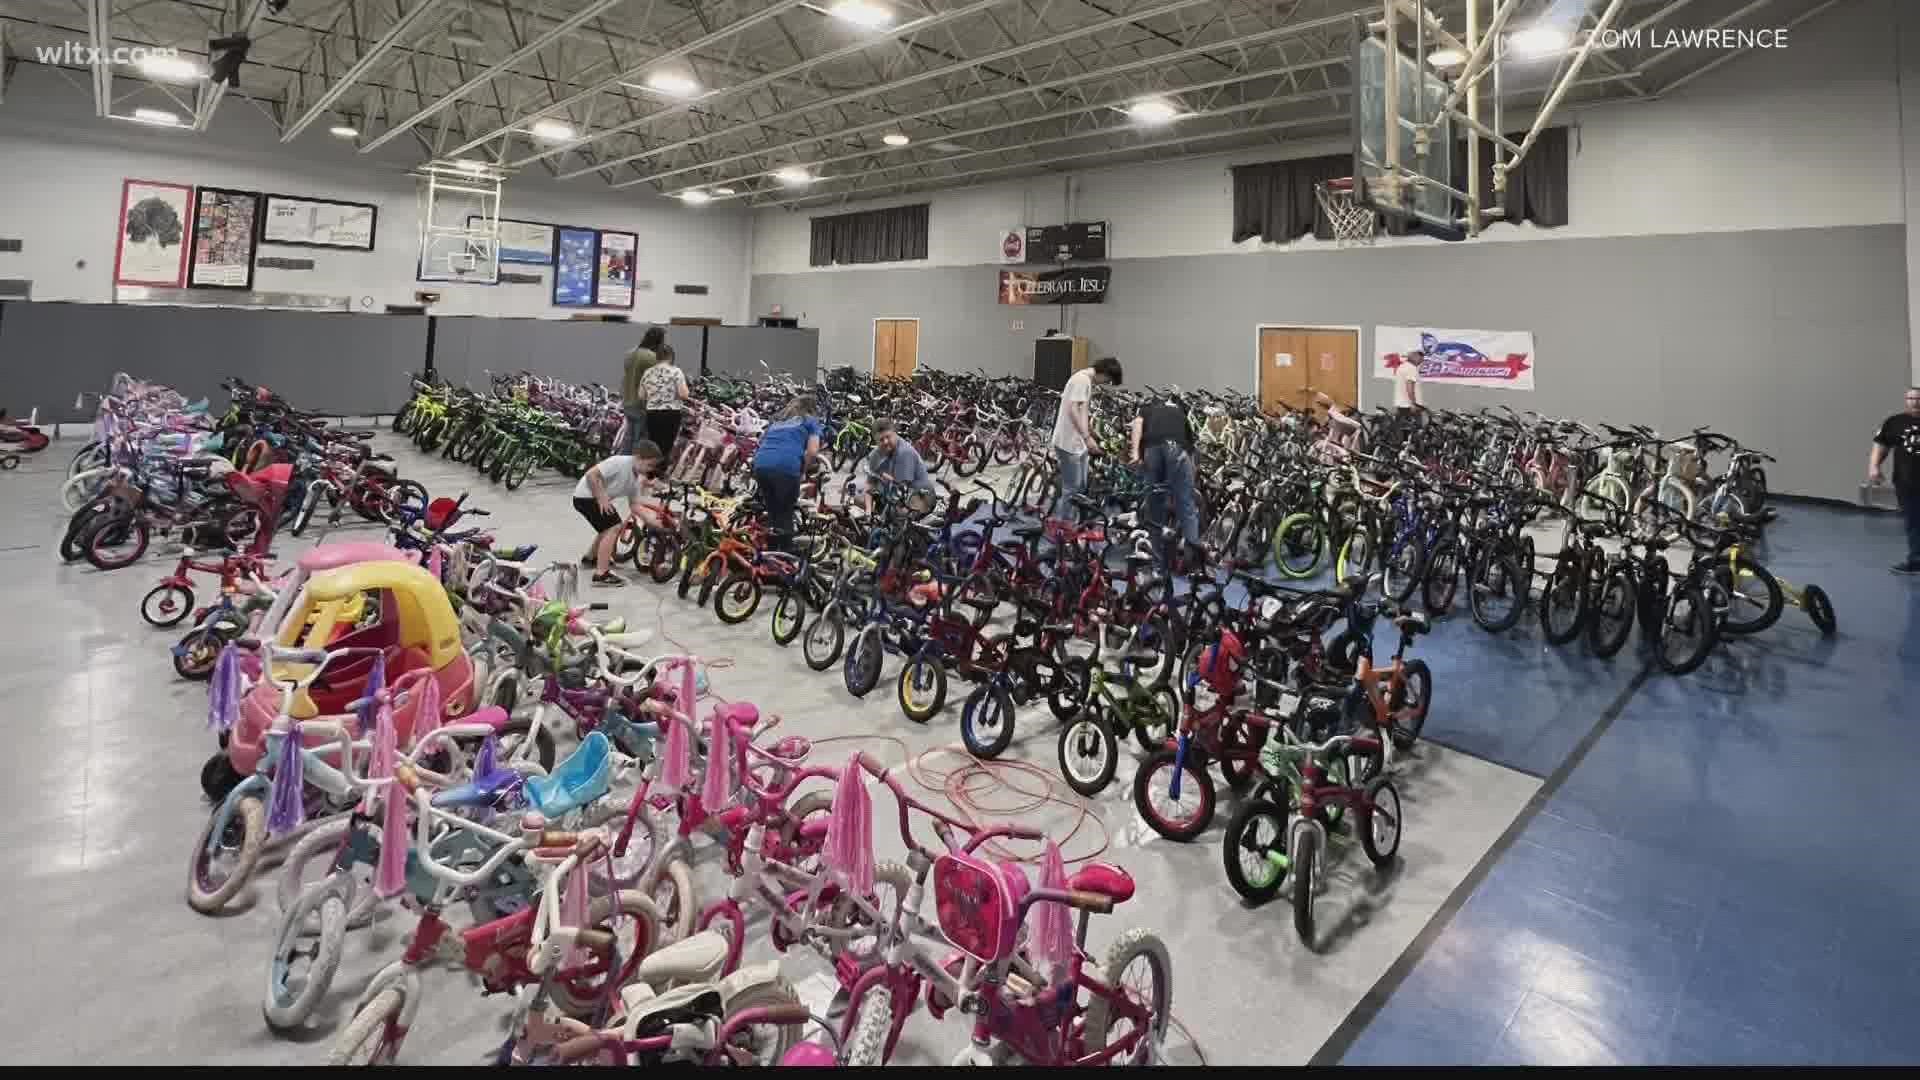 Tom Lawrence repairs bicycles year-round to give children at Christmas.